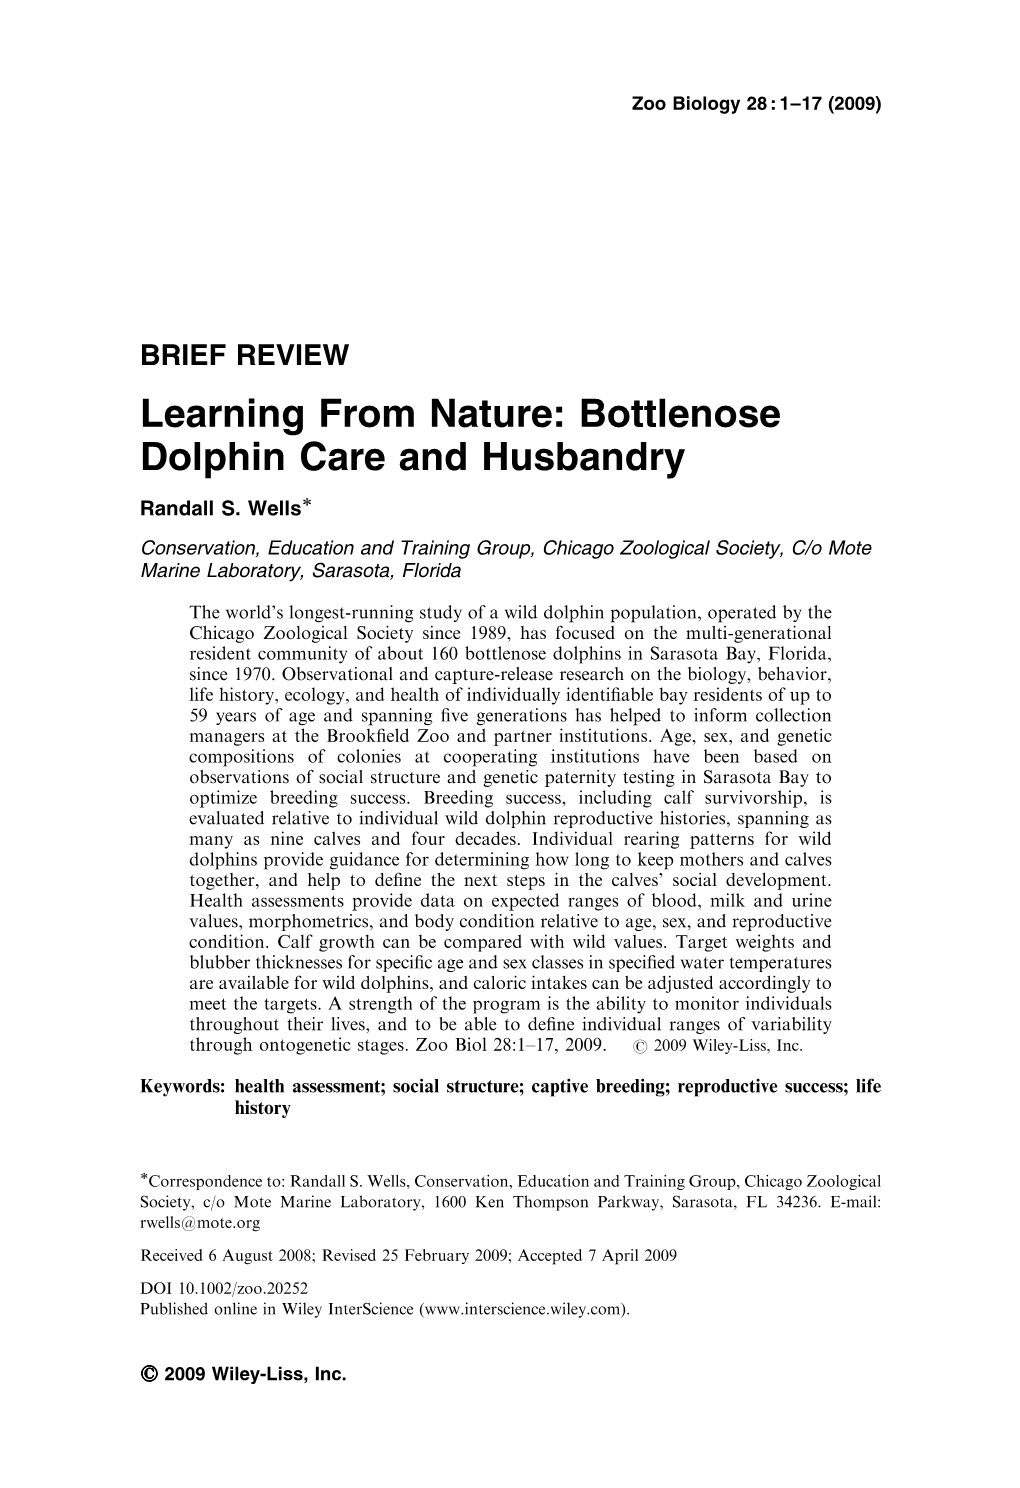 Learning from Nature: Bottlenose Dolphin Care and Husbandry